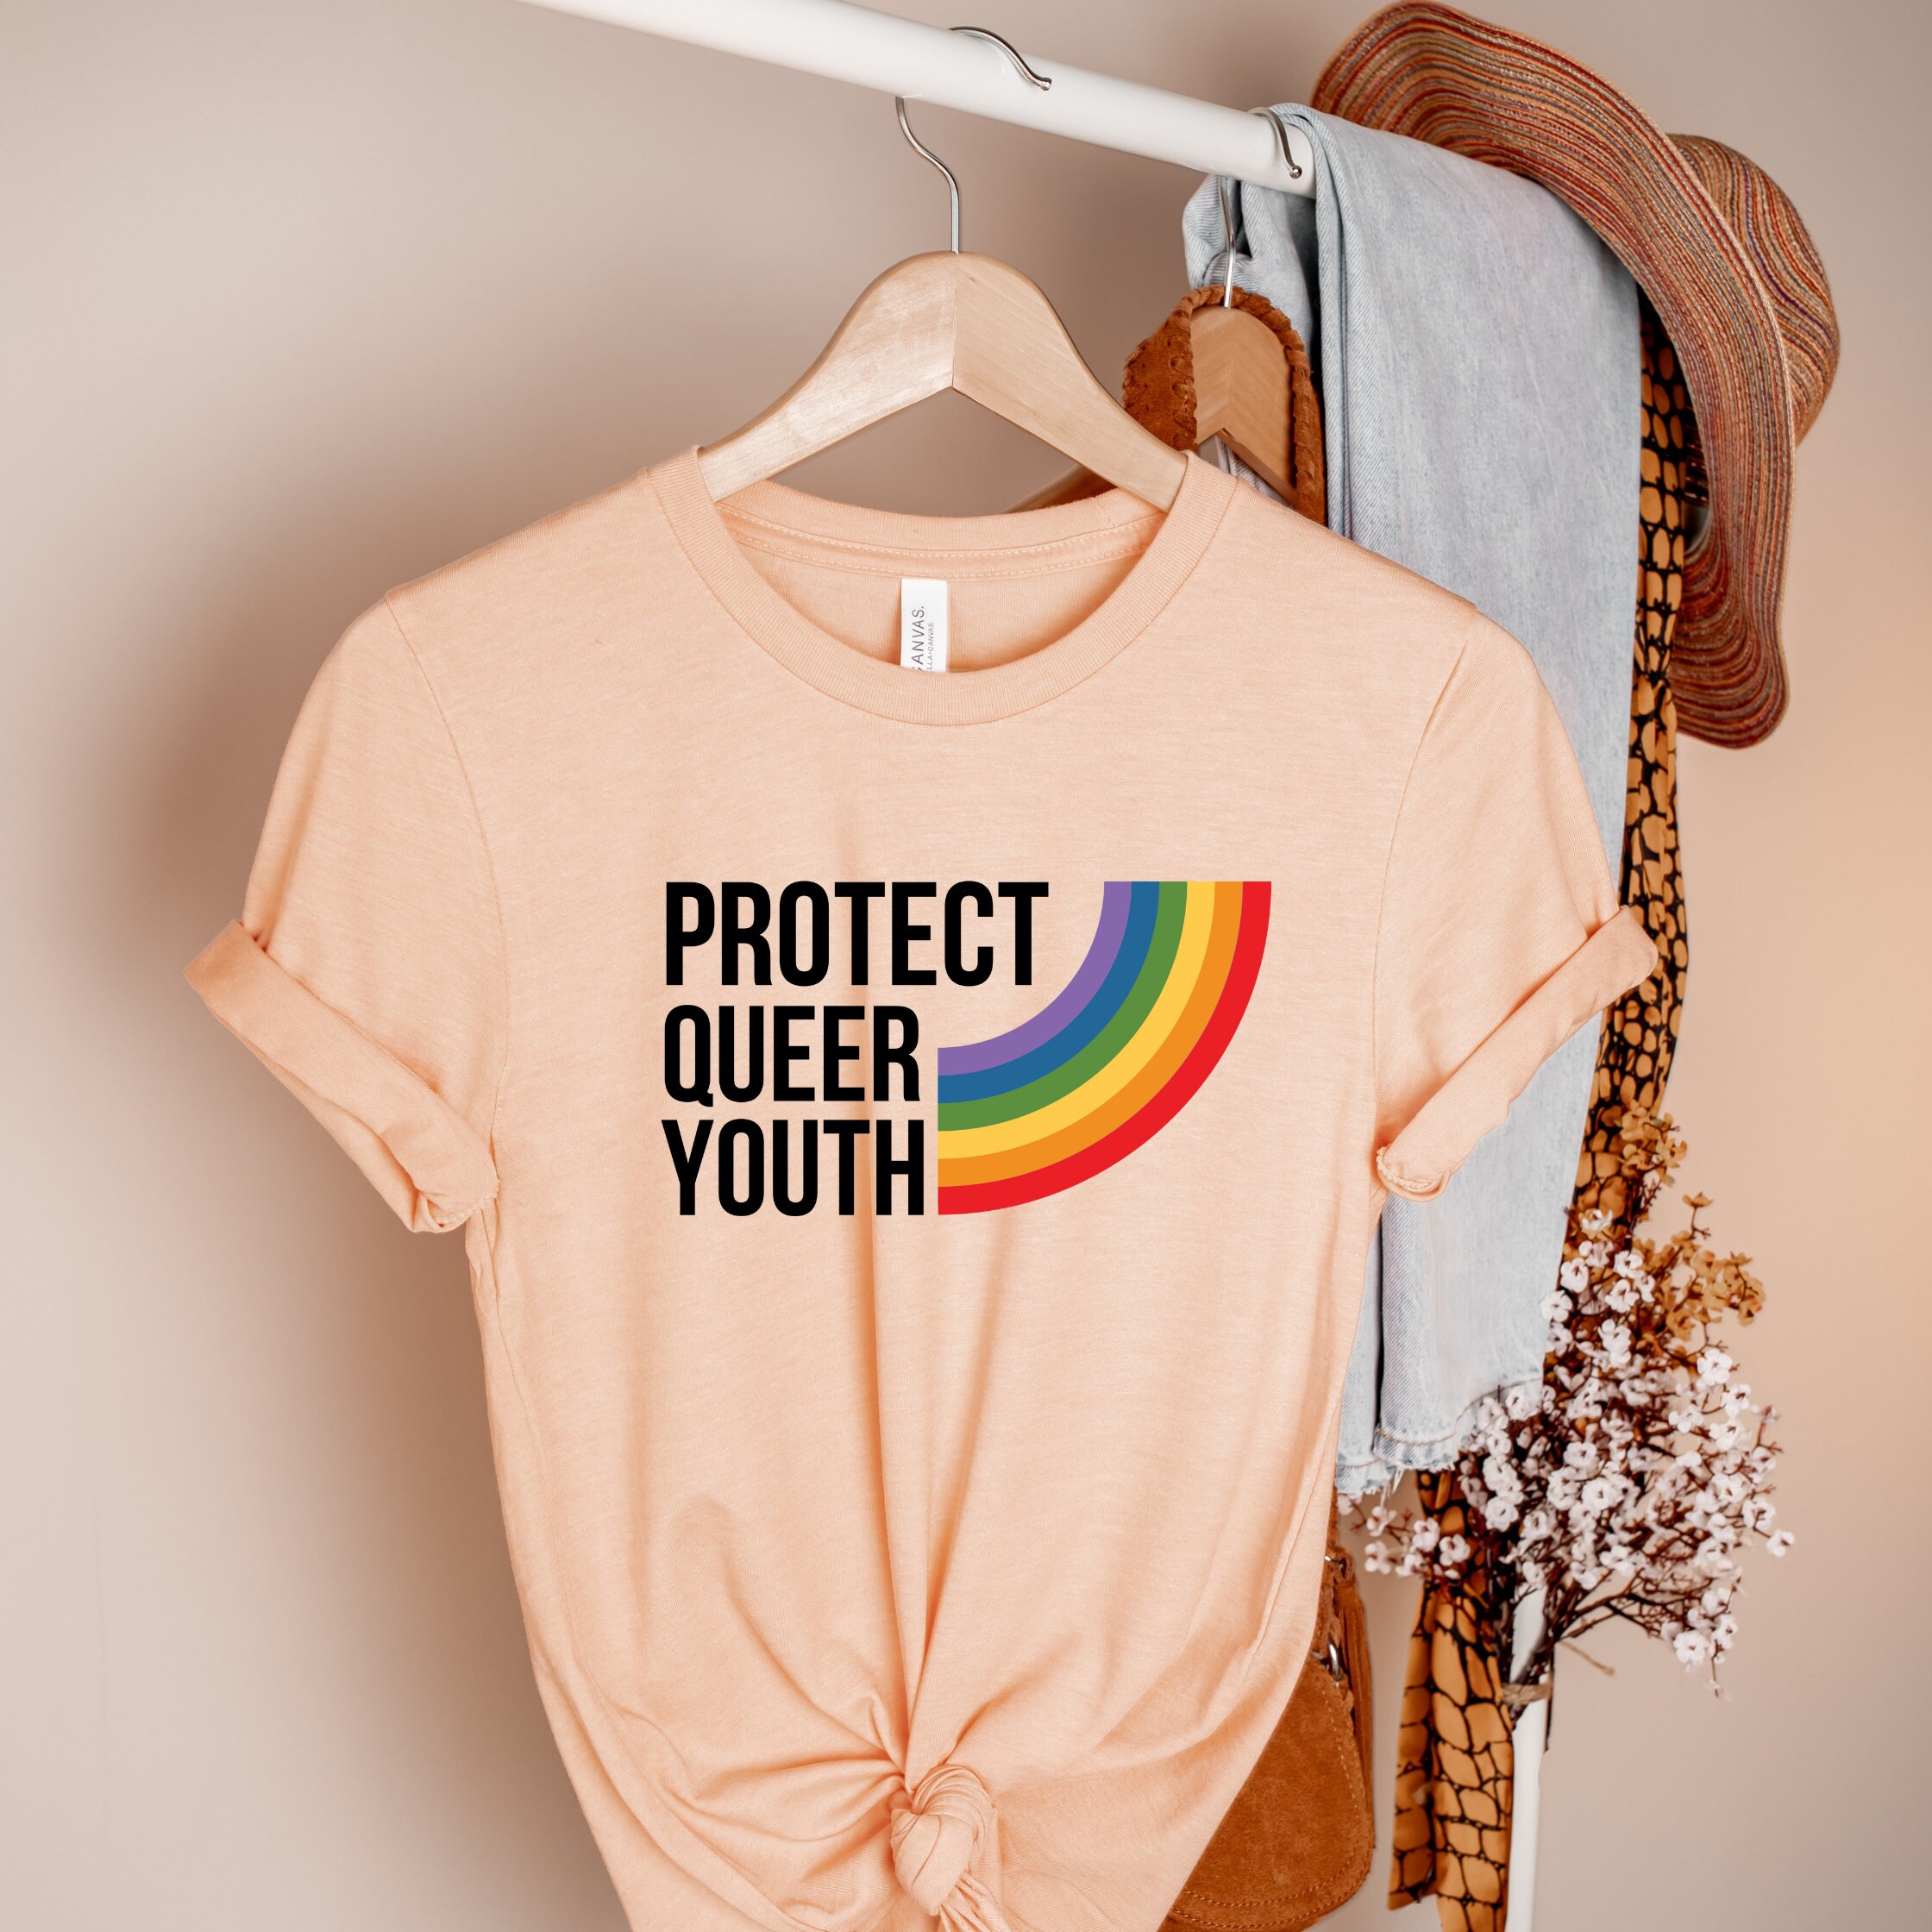 Protect Queer Youth Shirt Pride Clothing LGBTQ Ally Shirt - Etsy